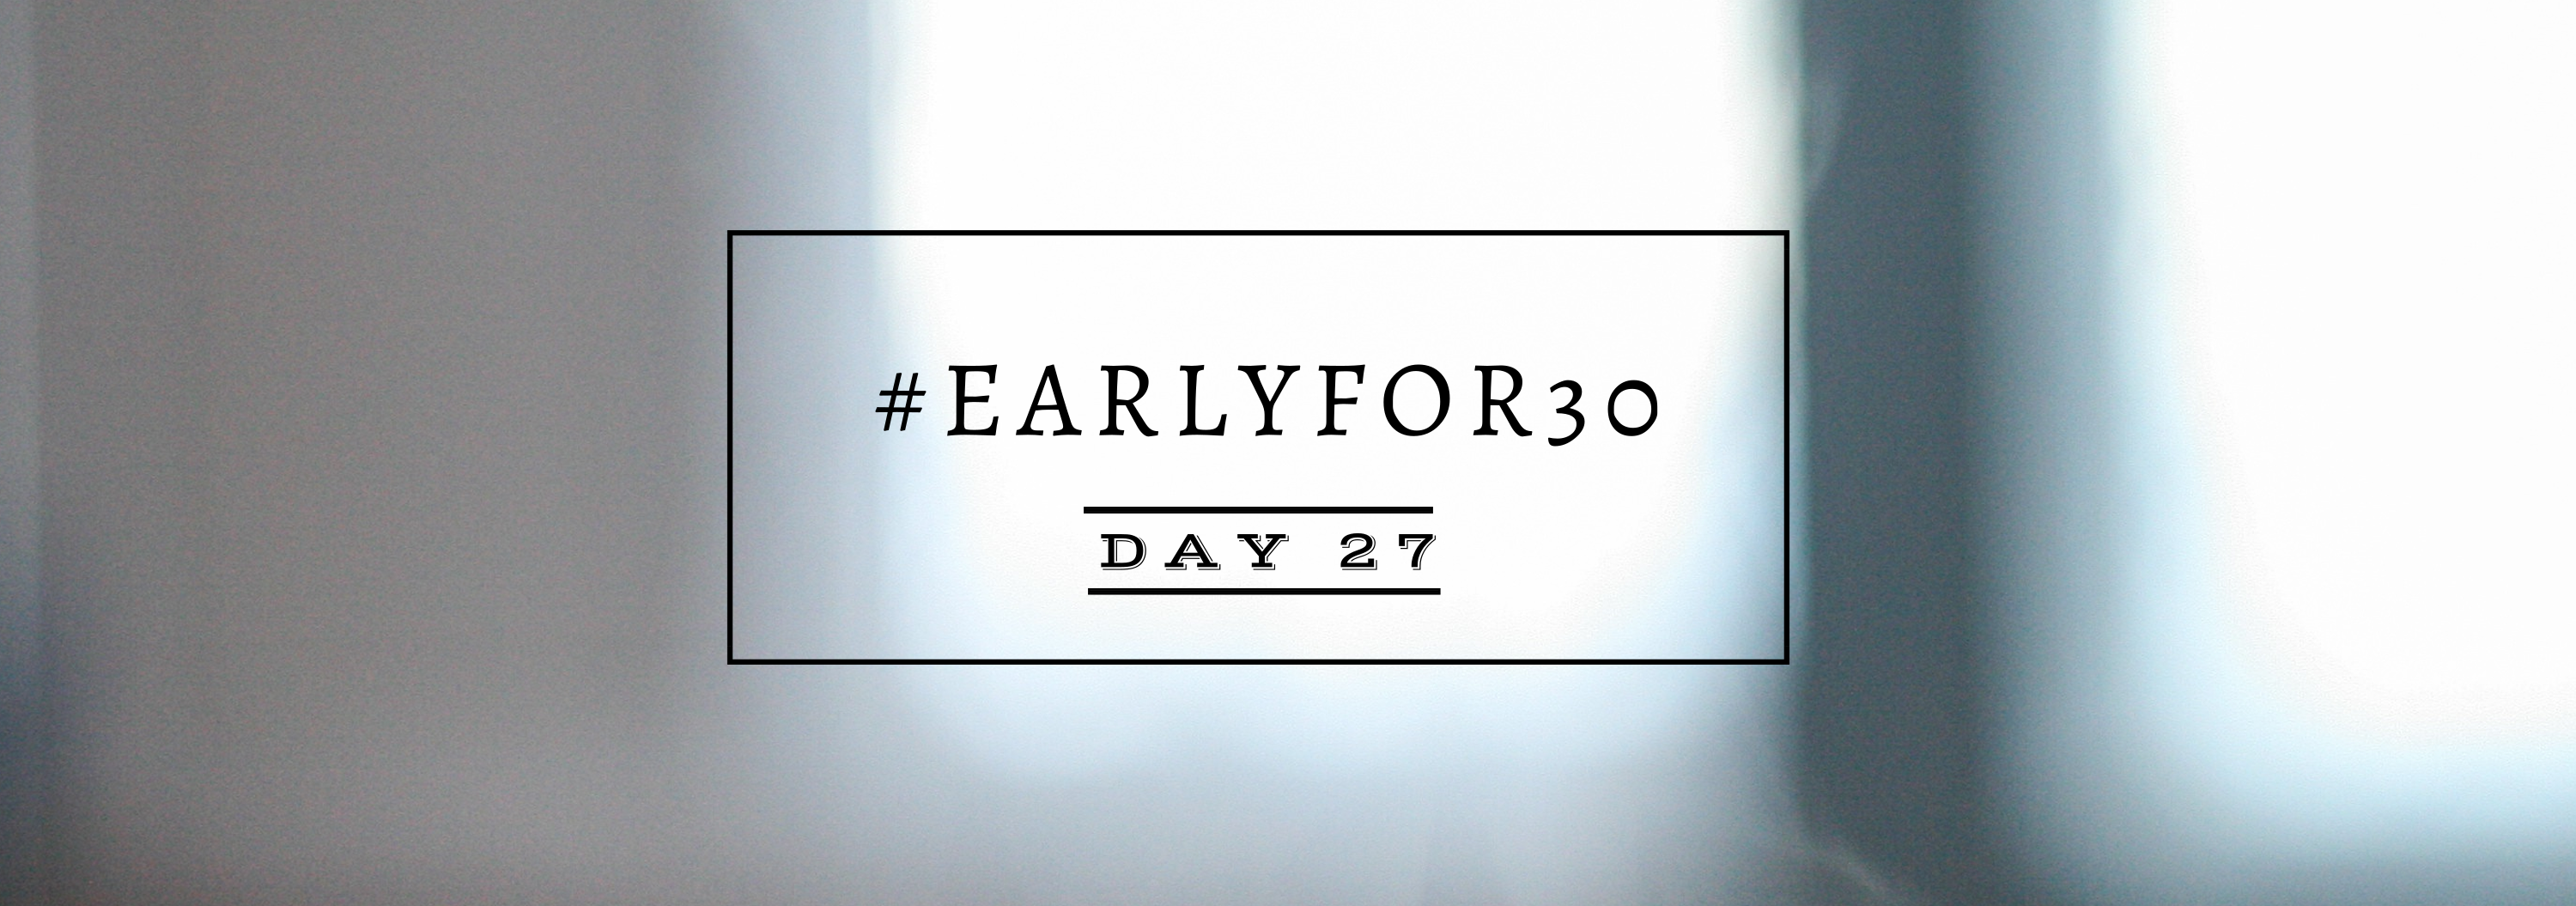 Day 27 Early for 30 Days Challenge